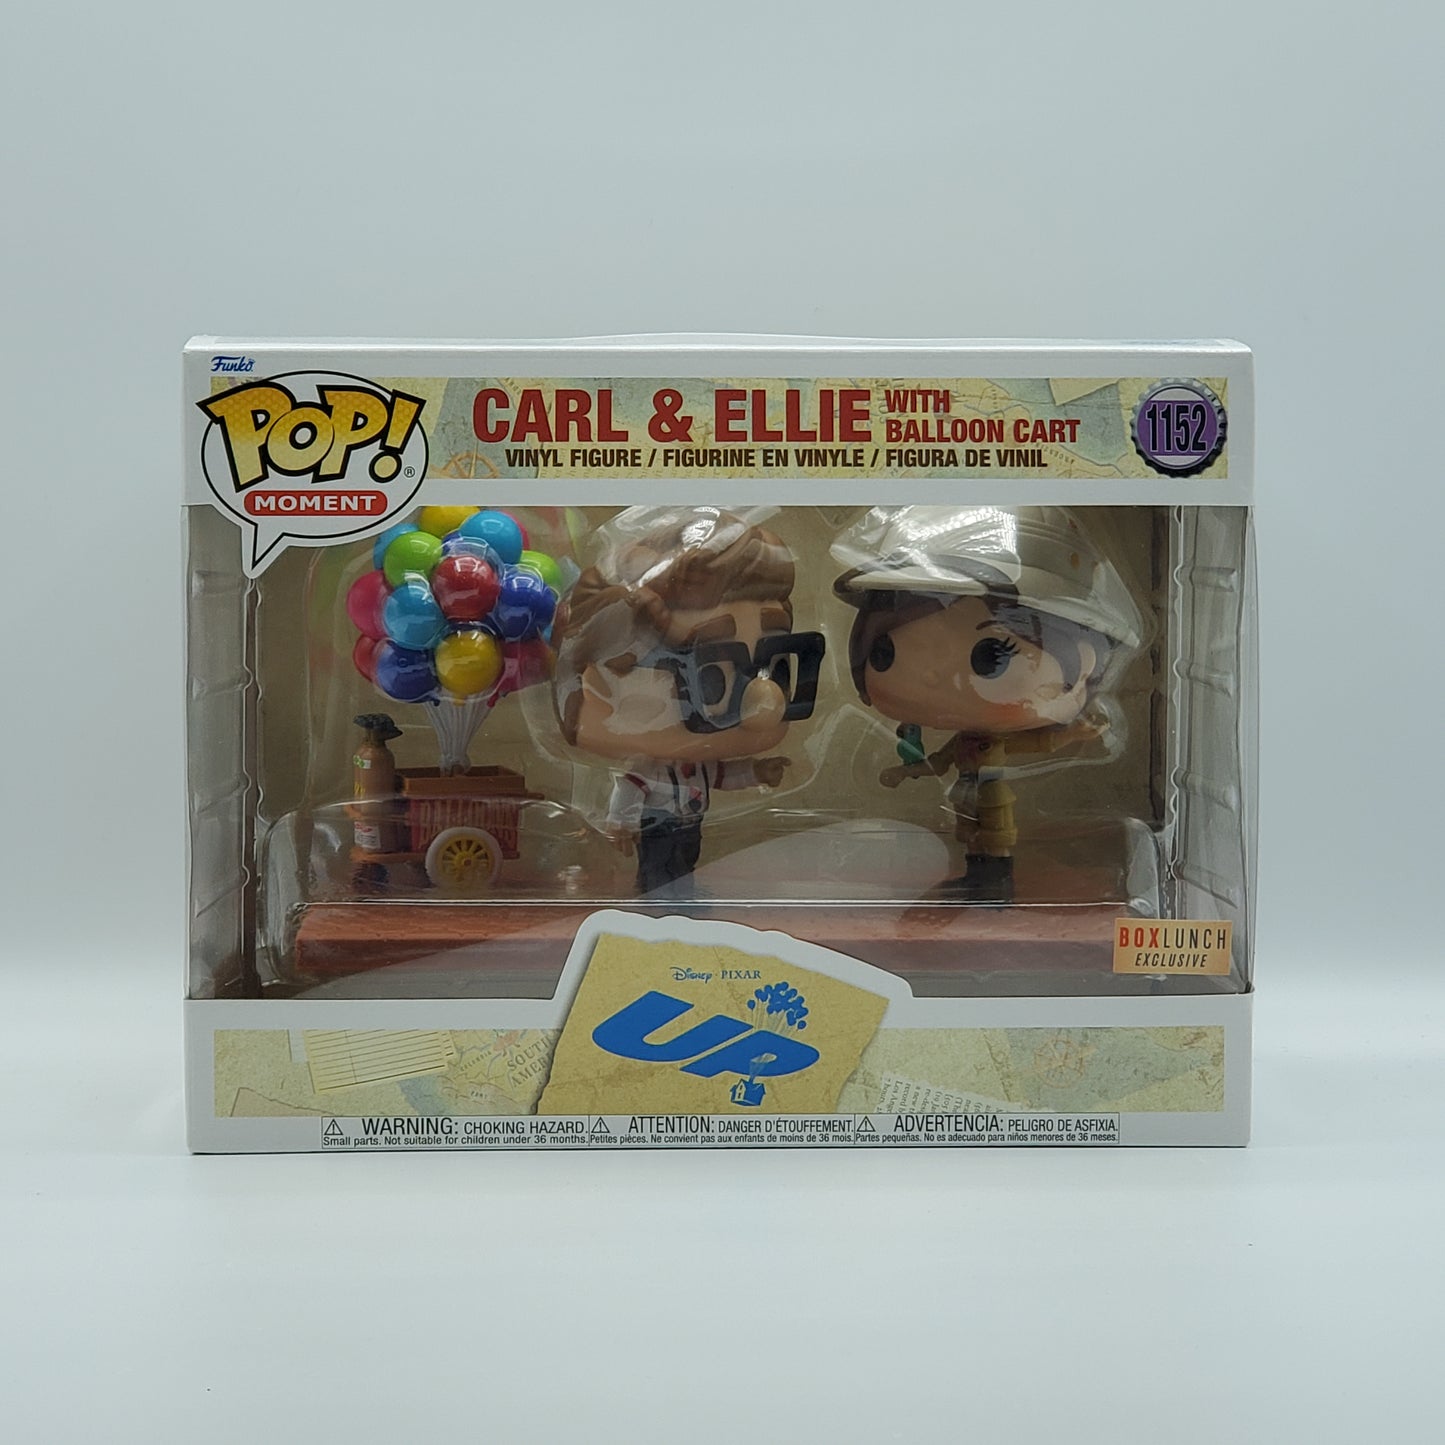 FUNKO POP! - CARL & ELLIE WITH BALLOON CART - BOXLUNCH EXCLUSIVE